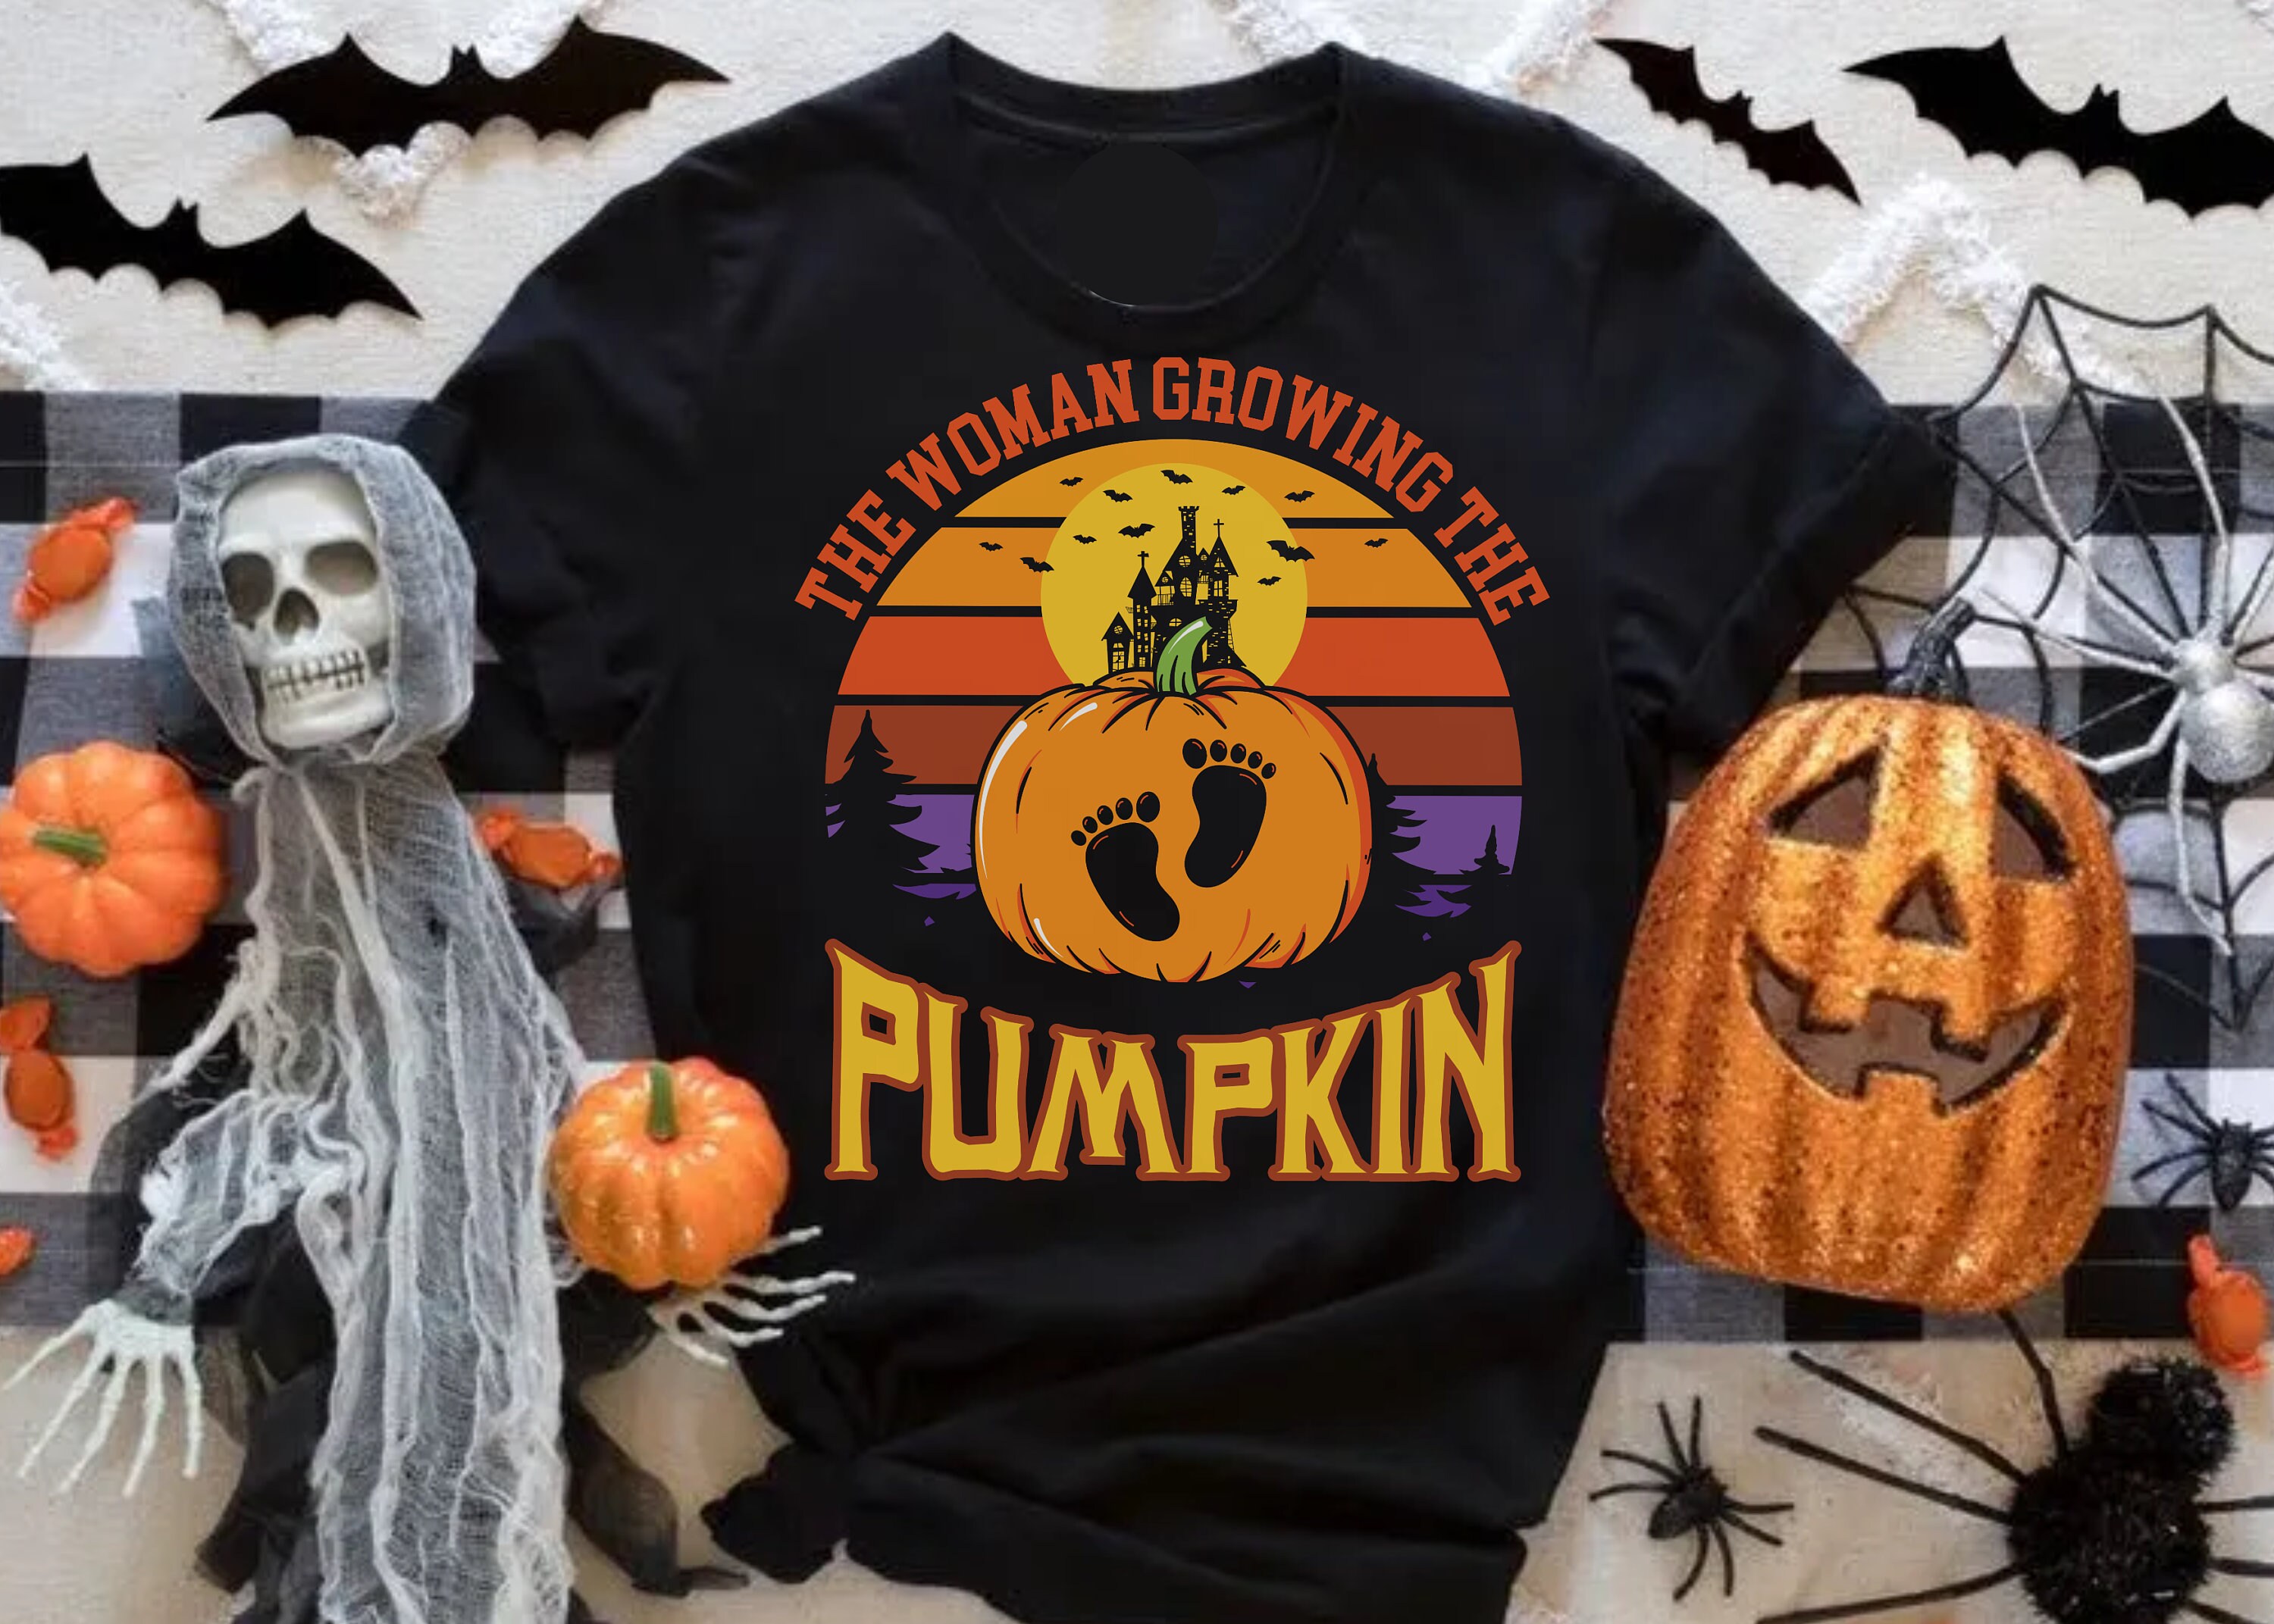 Discover Matching Halloween Couple Shirts, Funny Couples Costumes, Spooky Season Shirts for Couples, His and Hers Halloween Pajamas, Pumpkin T-shirt